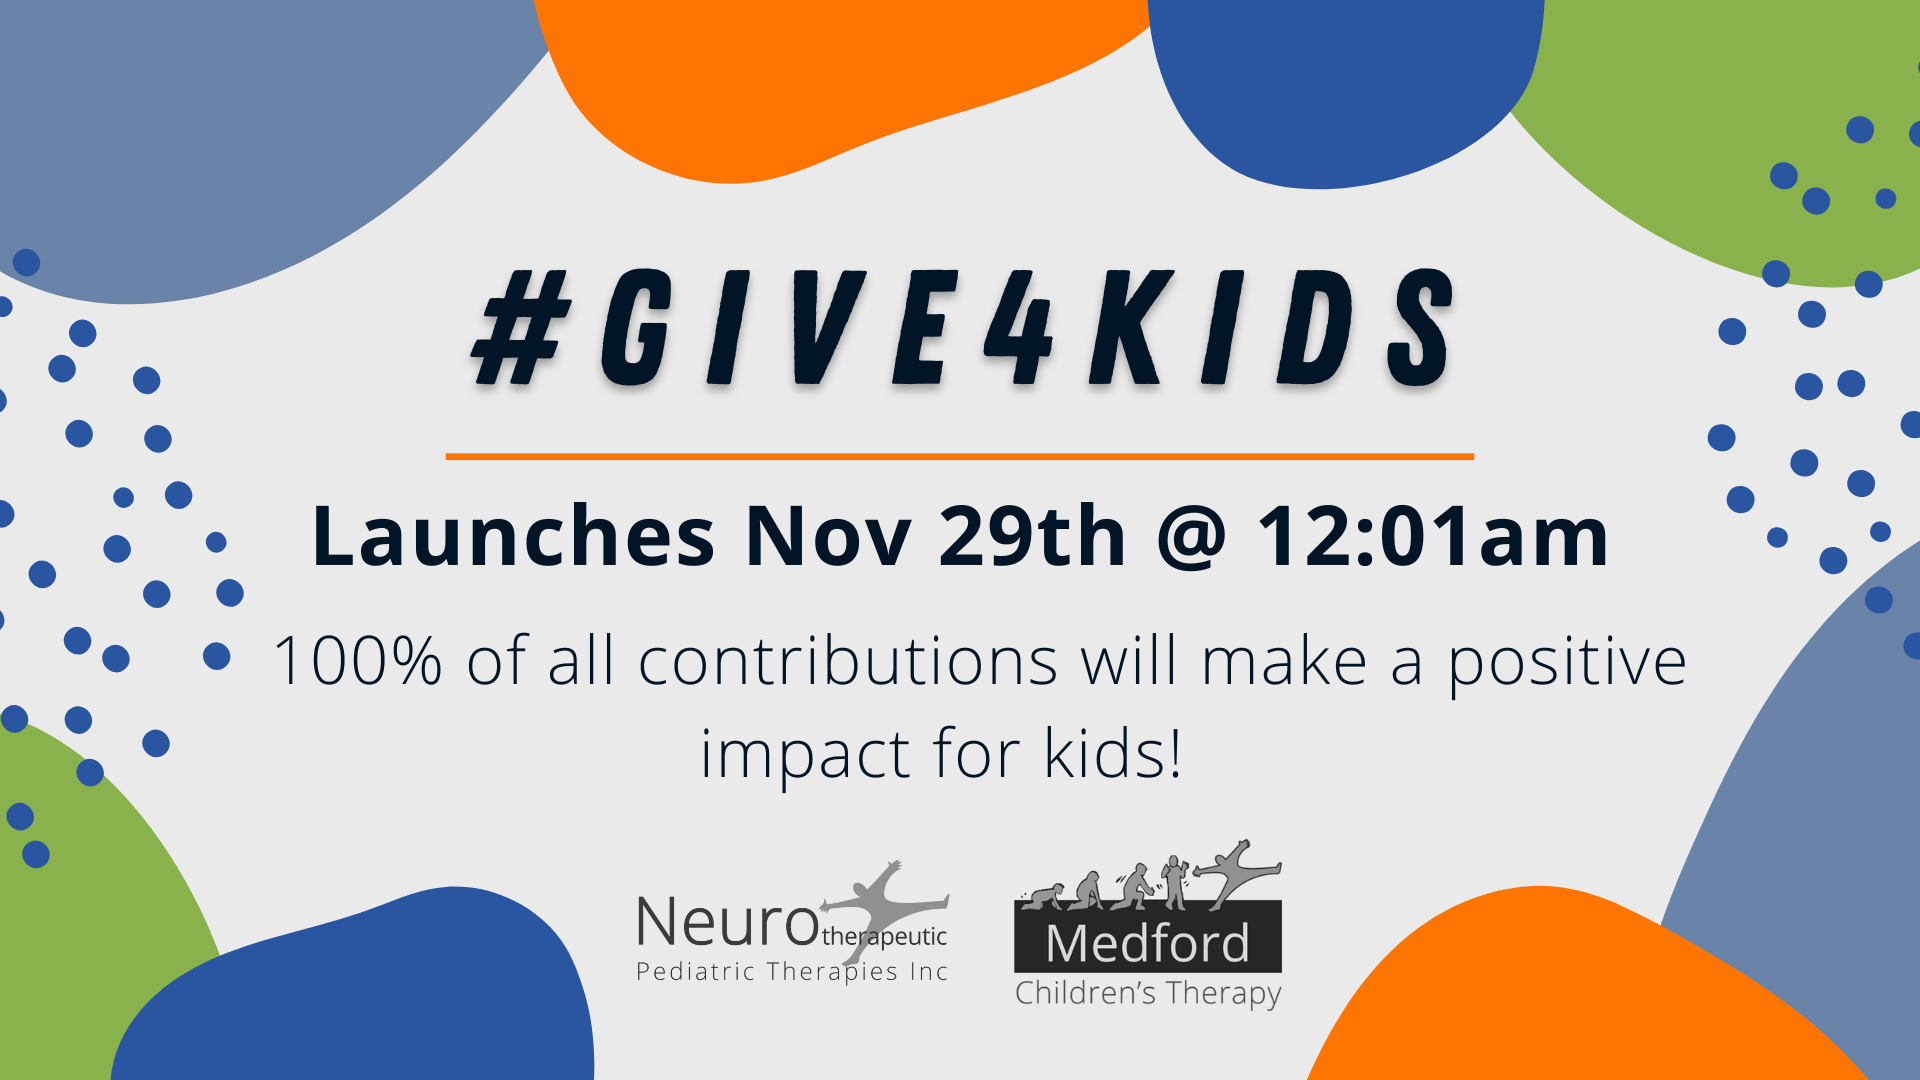 Give4kids Year End Campaign Launches Nov 29th. Check out our event site! 